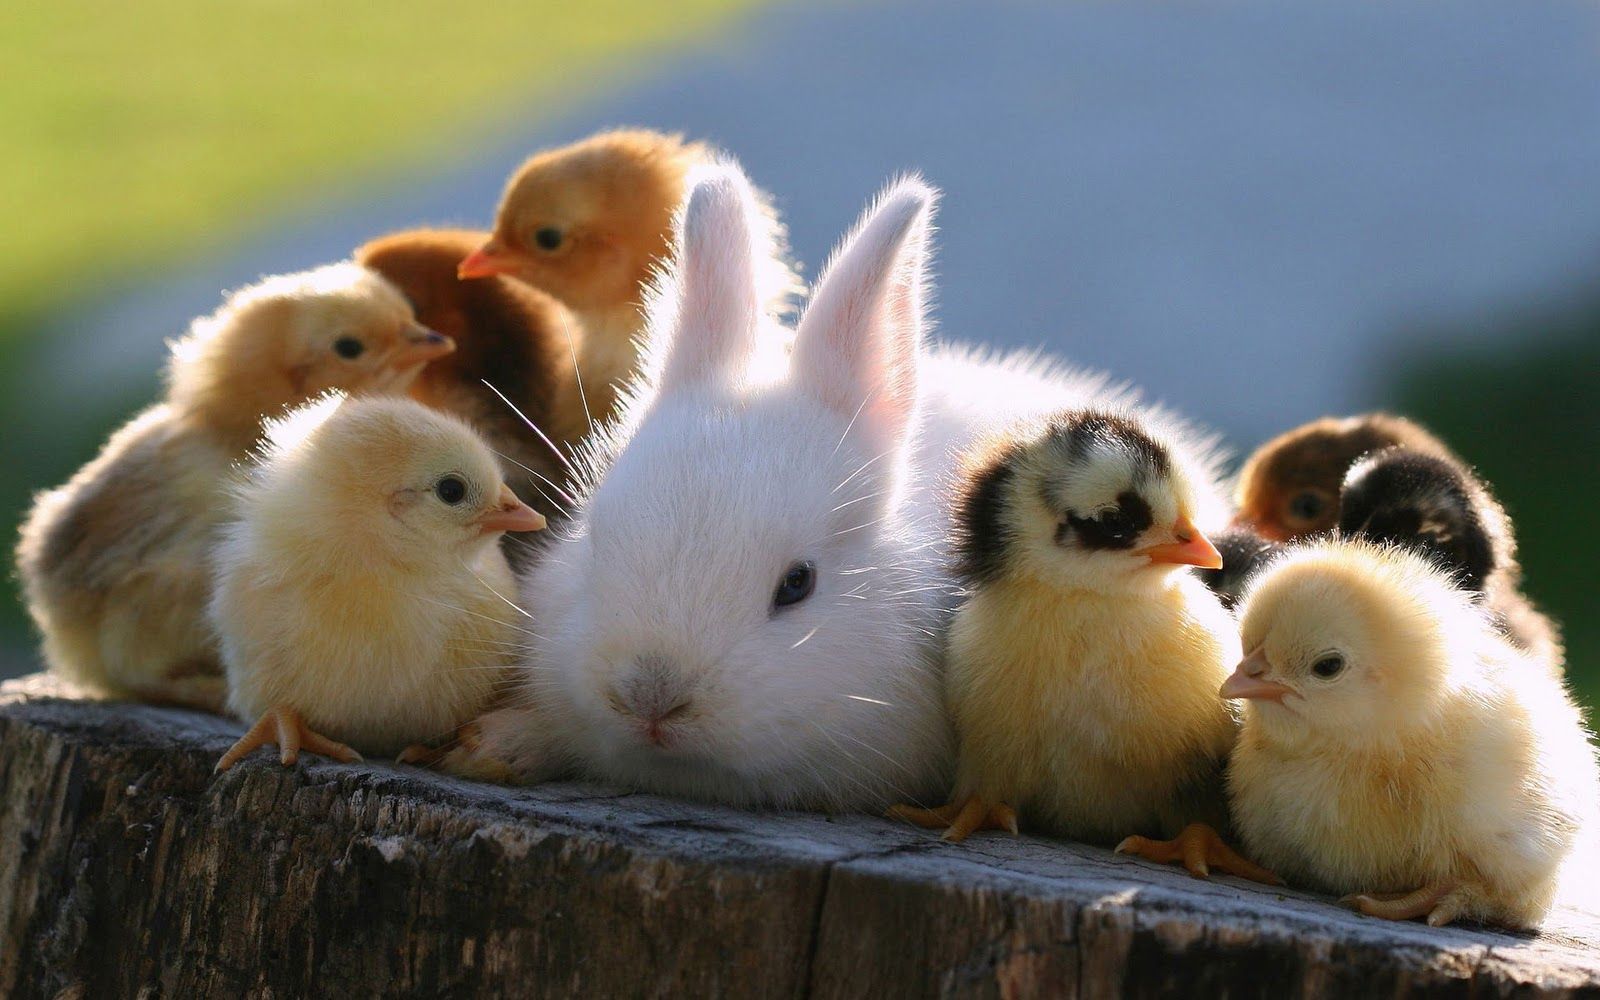 Baby Chickens Hanging Out With A Bunny. Baby animals picture